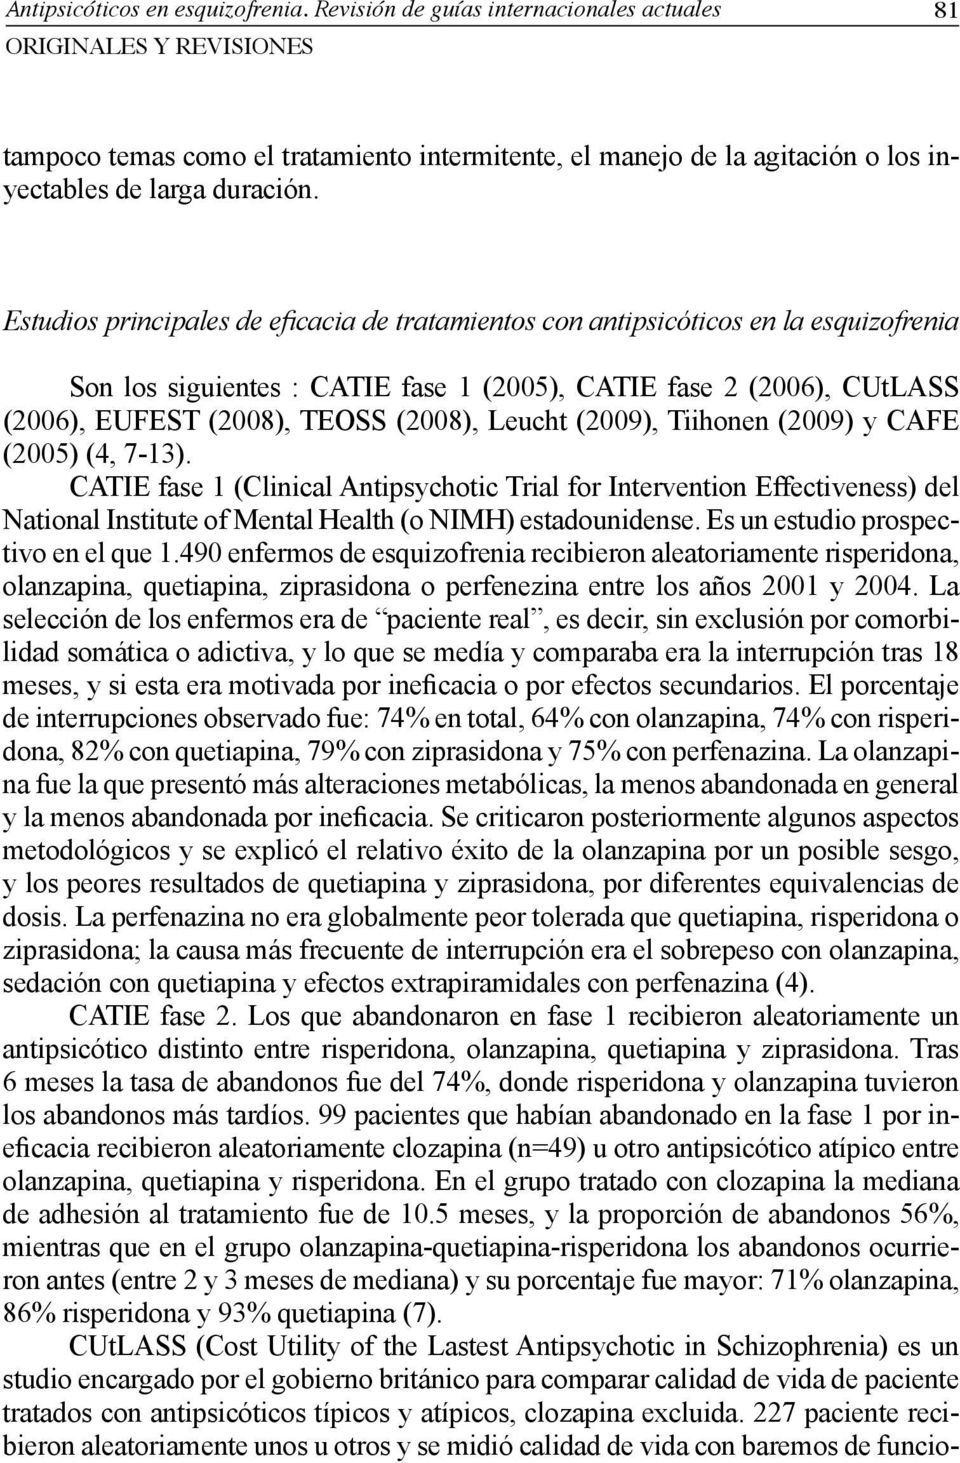 Leucht (2009), Tiihonen (2009) y CAFE (2005) (4, 7-13). CATIE fase 1 (Clinical Antipsychotic Trial for Intervention Effectiveness) del National Institute of Mental Health (o NIMH) estadounidense.